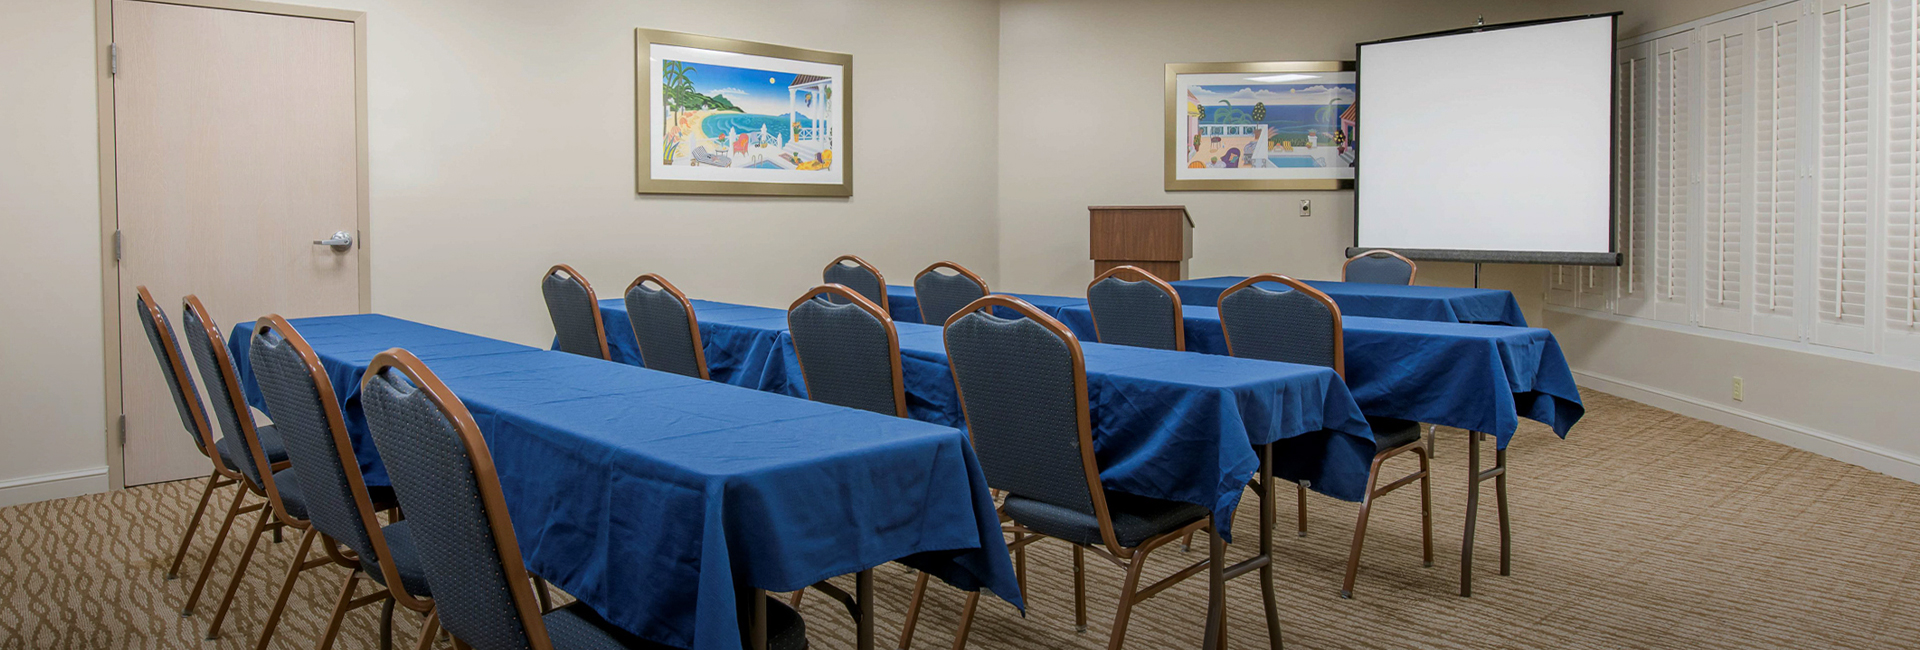 meeting room with blue tables and chairs in a line